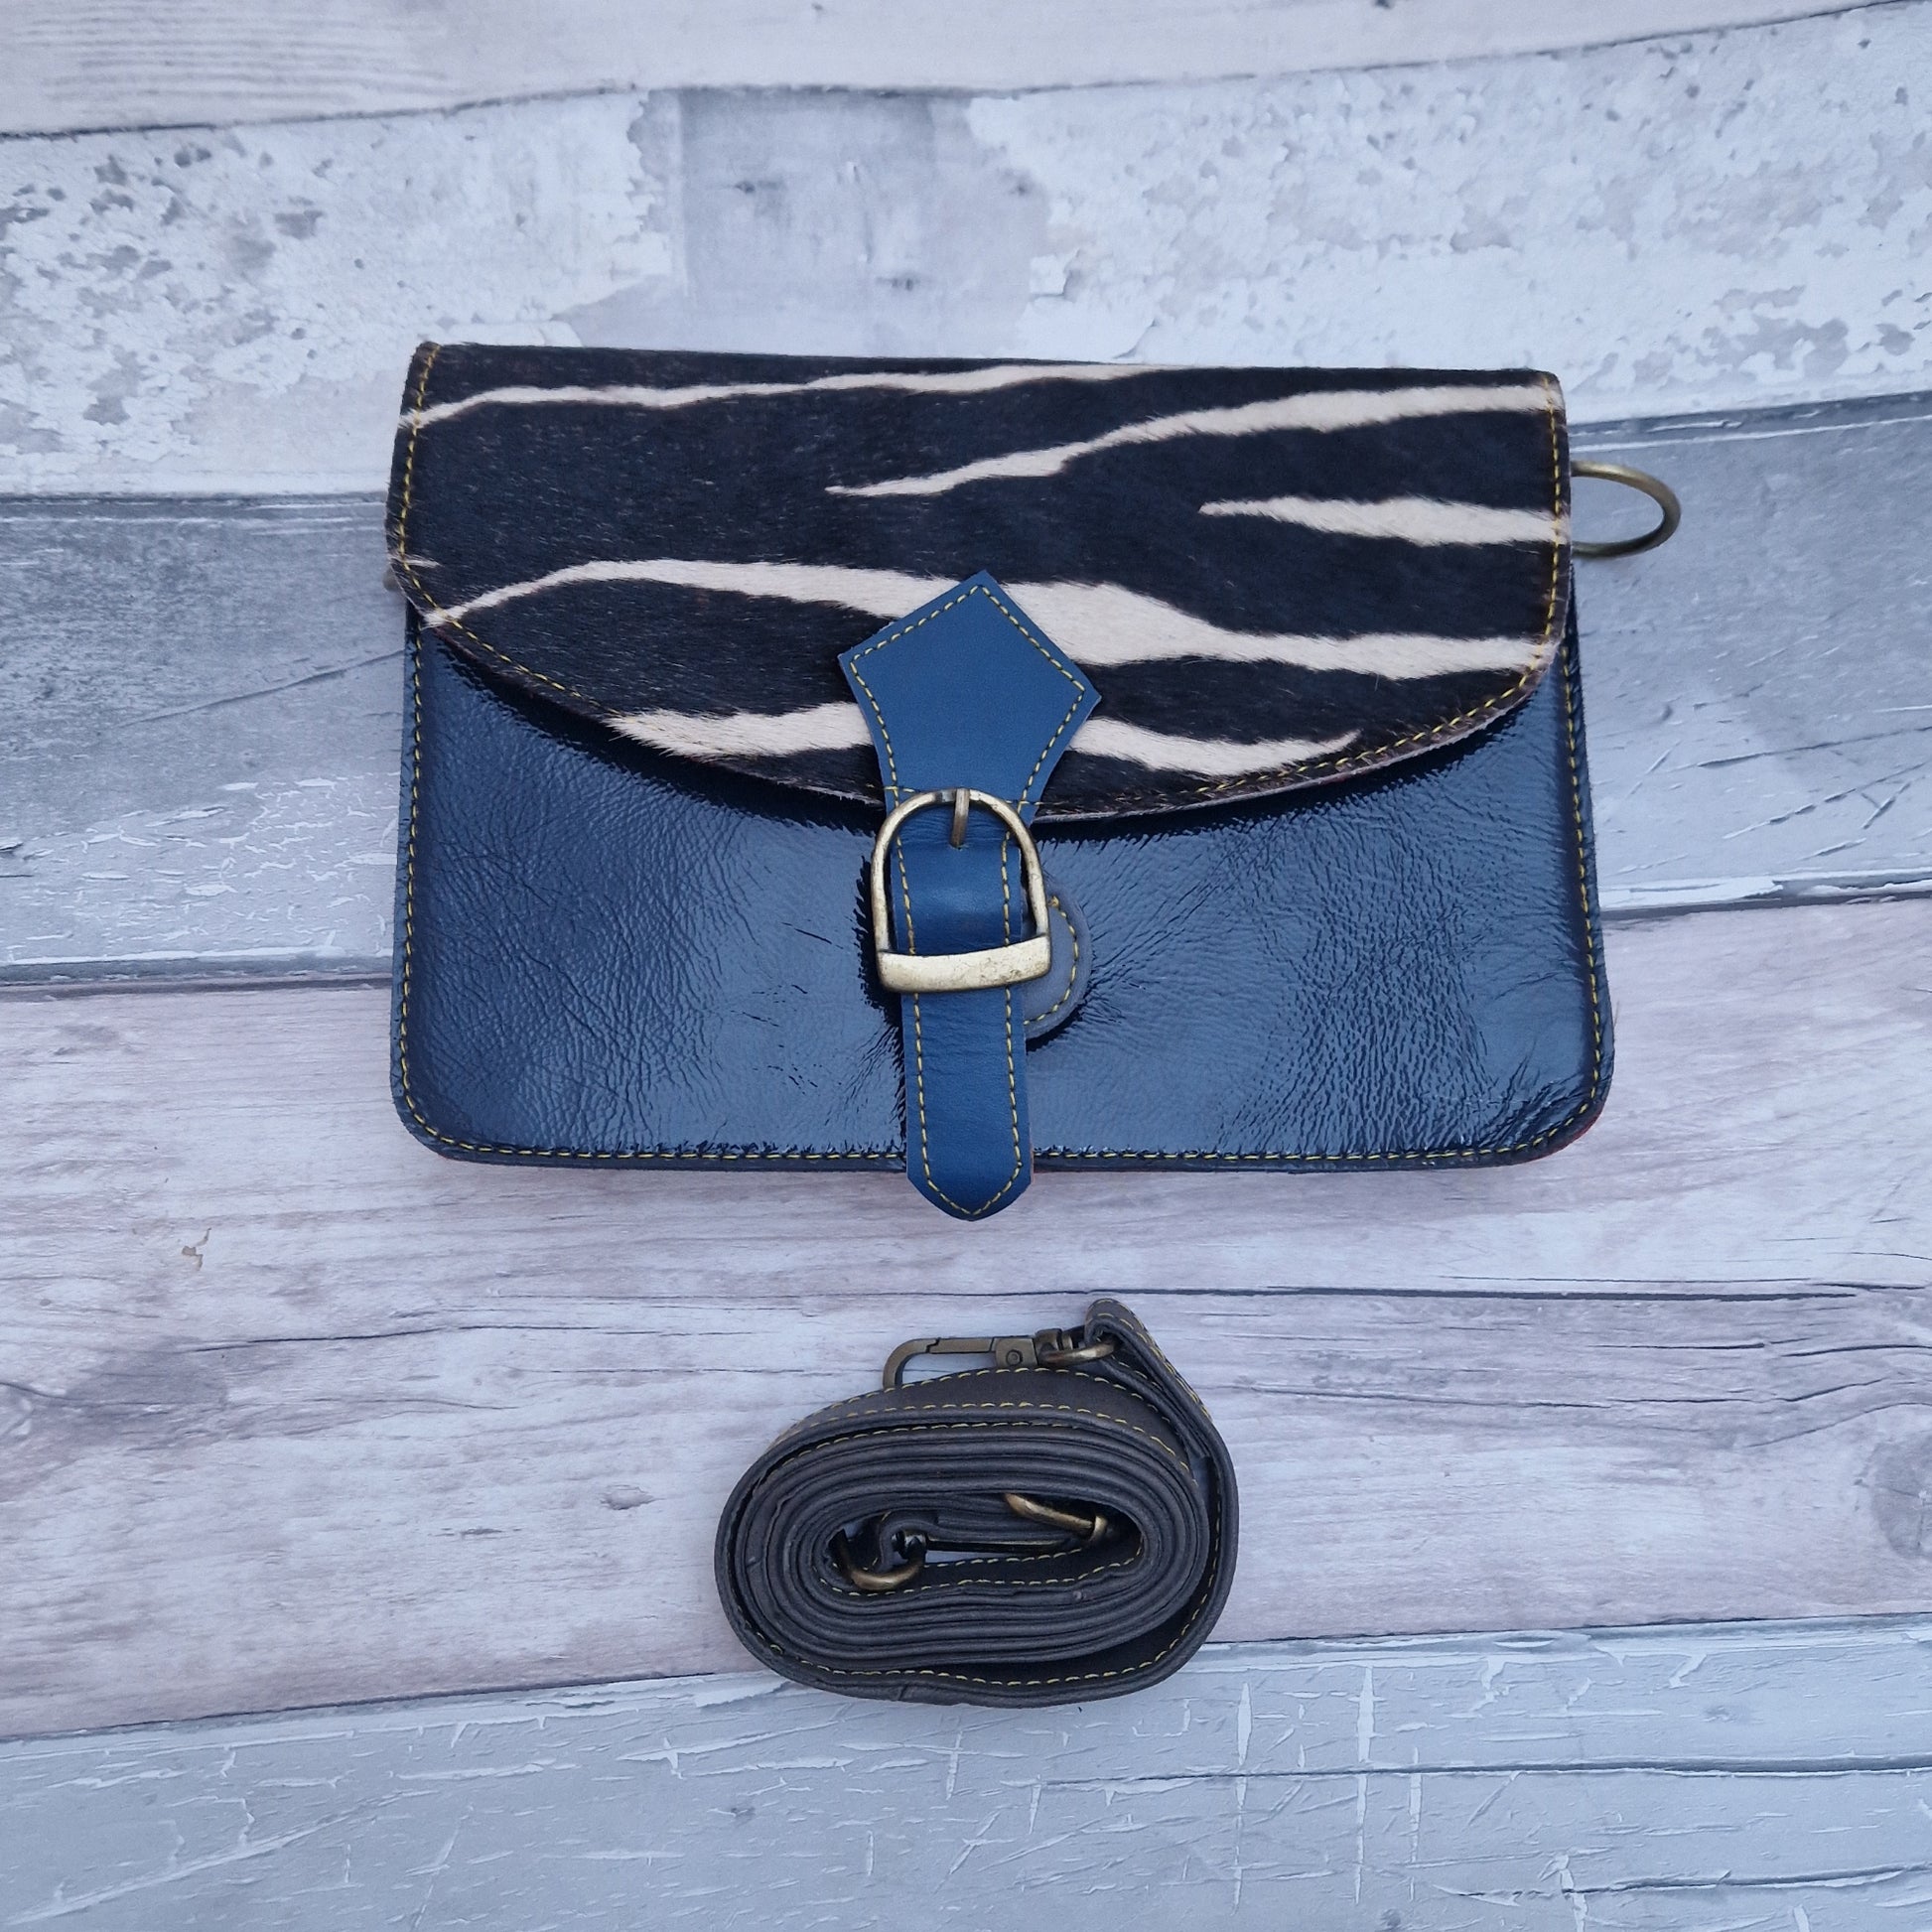 Navy leather bag with a textured panel in Zebra print.